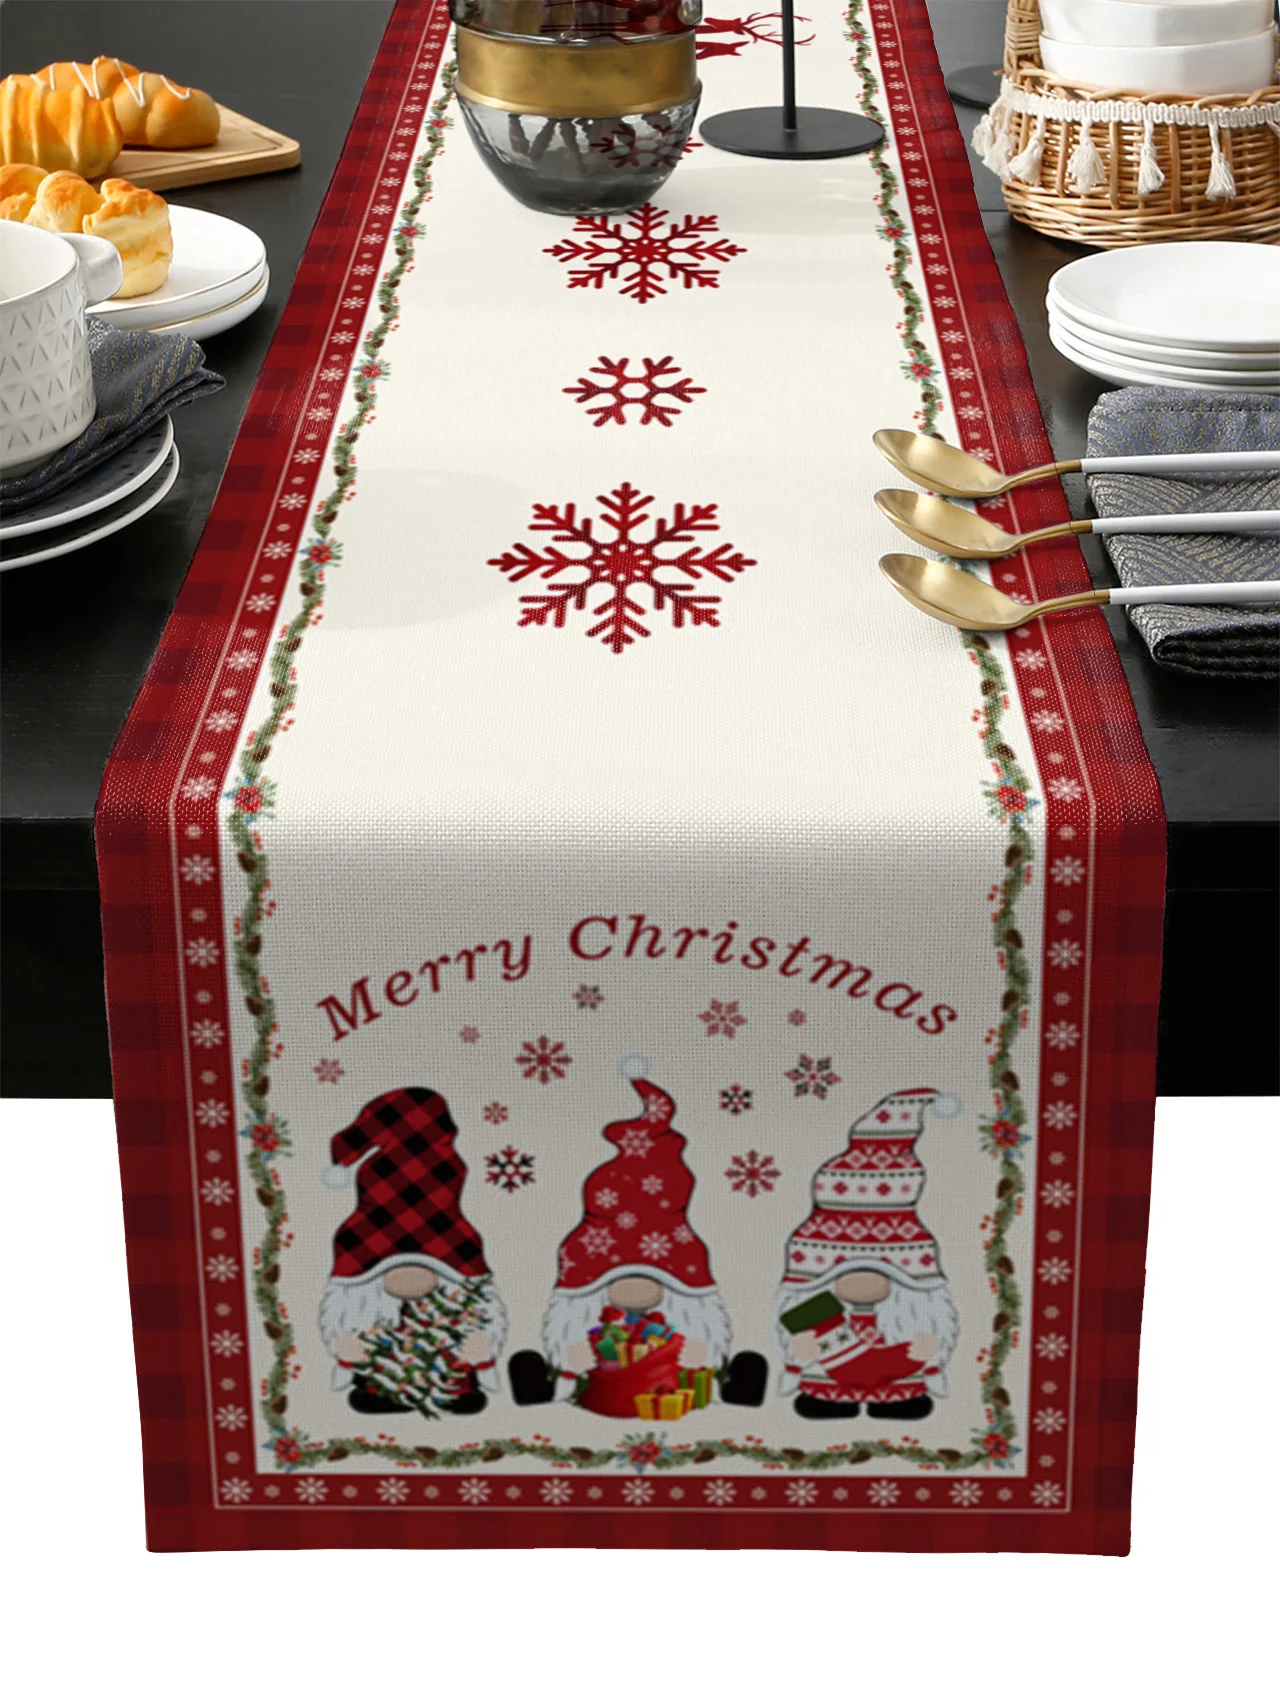 

Christmas Gnome Table Runner Wedding Festival Table Decoration Home Decor Kitchen Table Runners Placemats